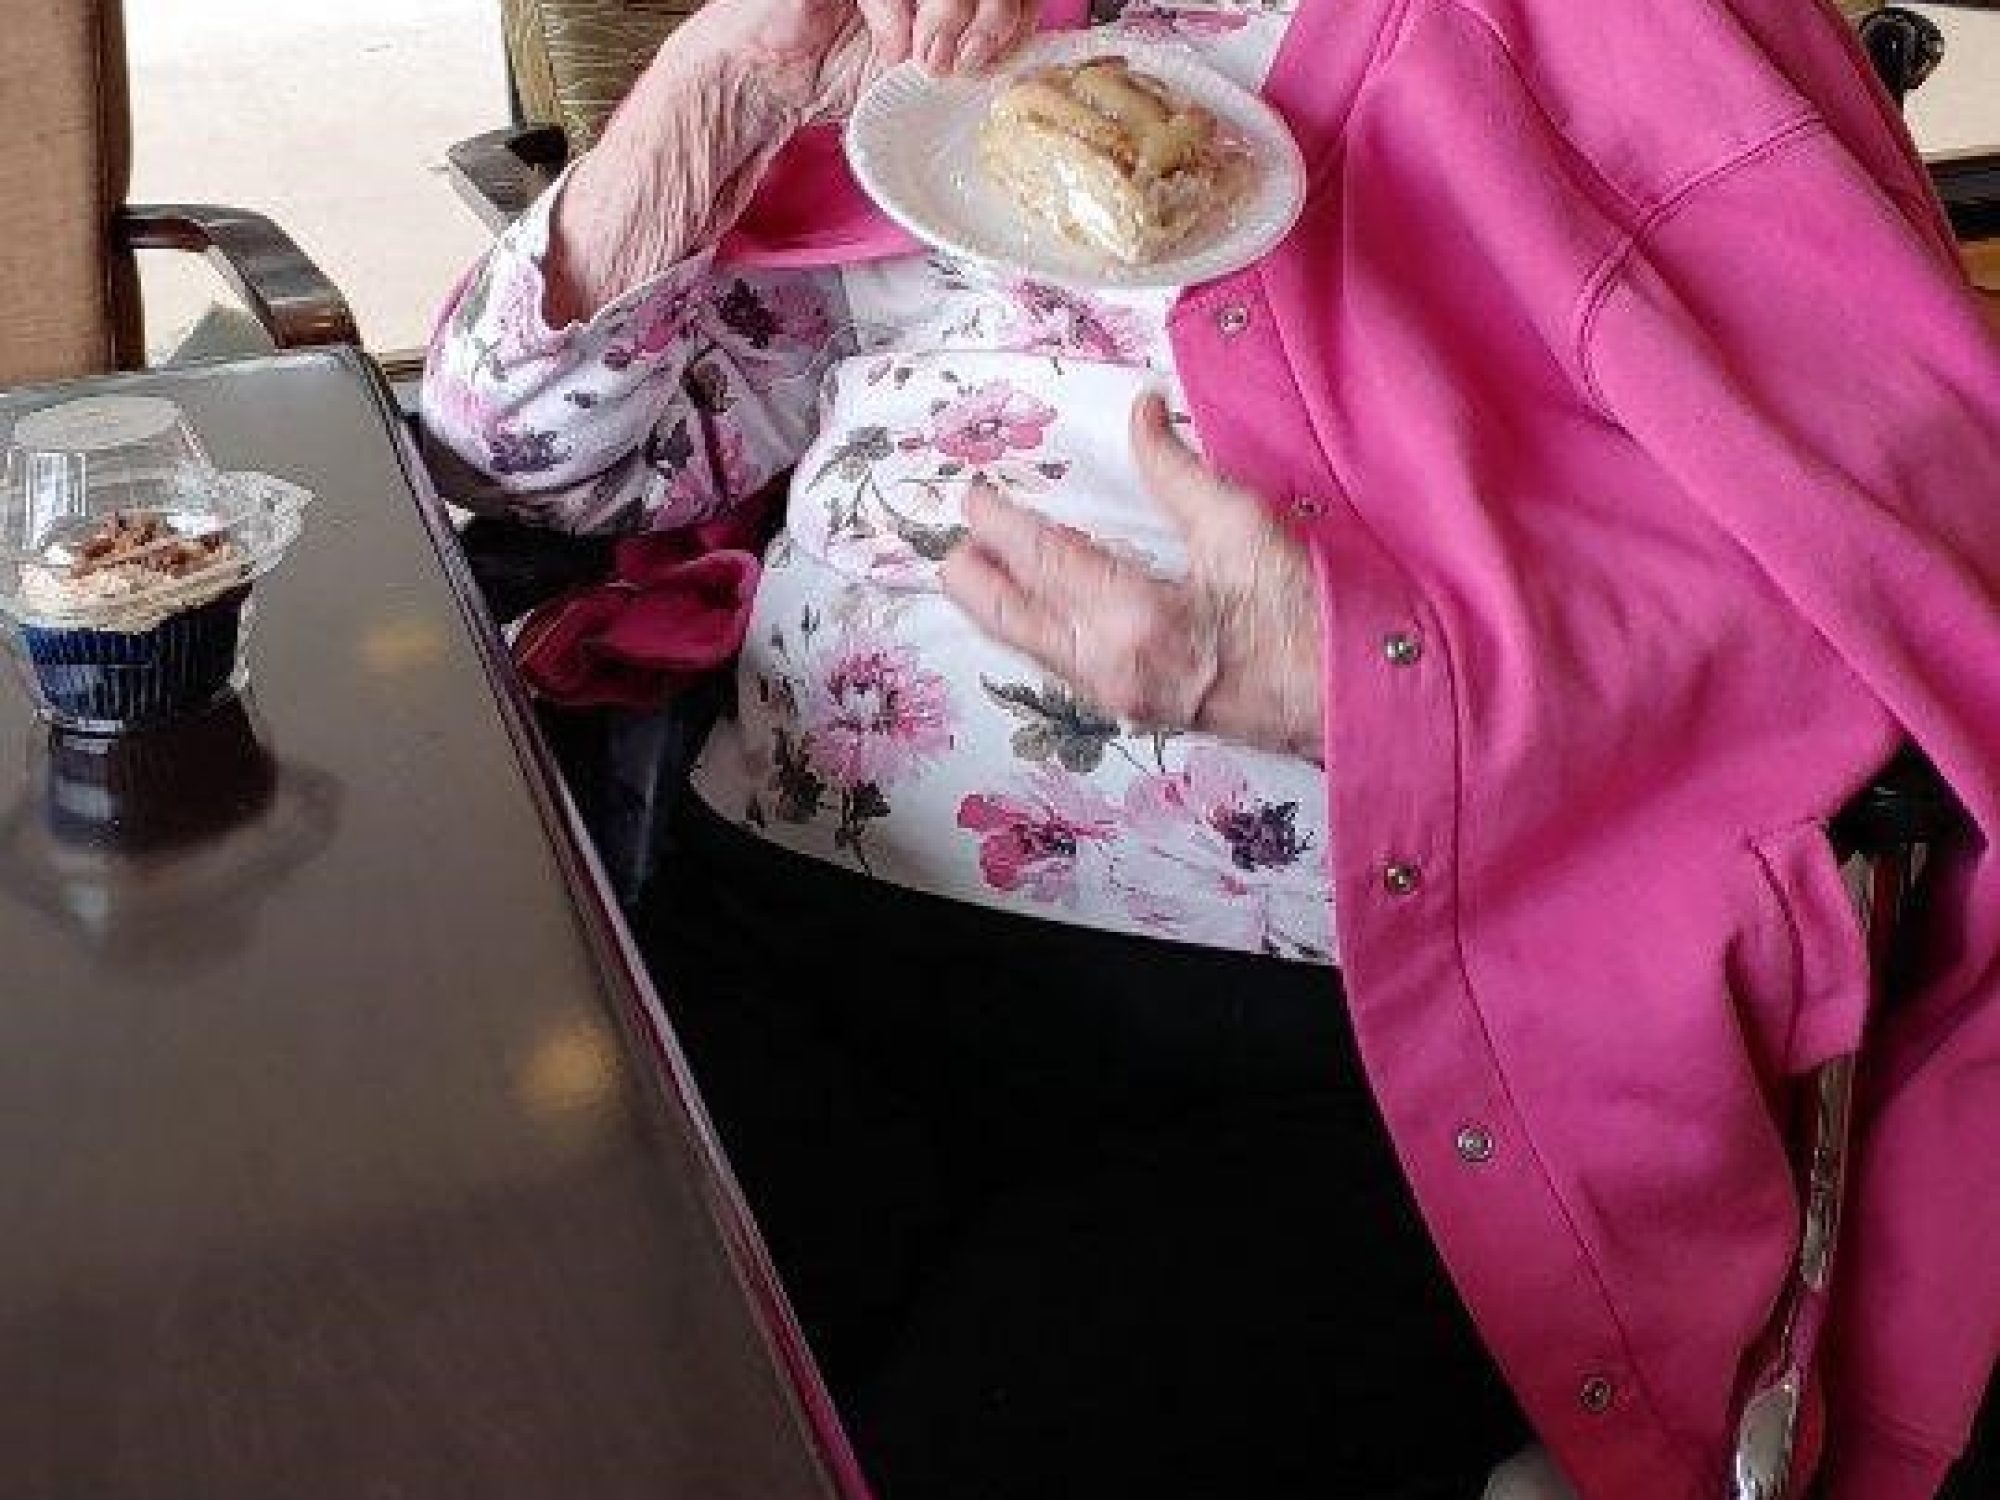 A resident enjoys a baked good from the bake sale fundraiser.